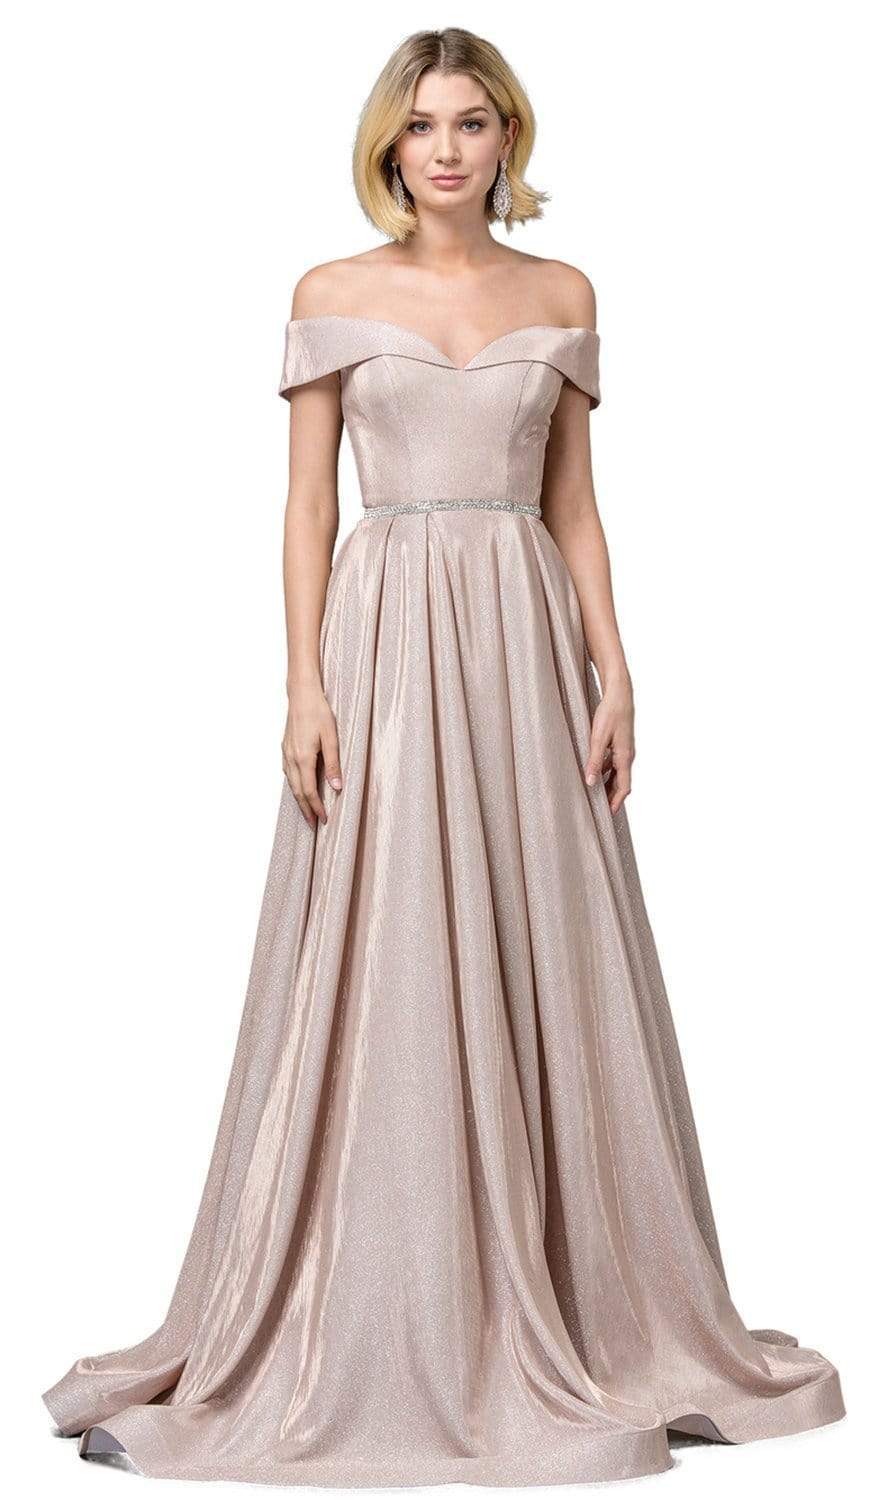 Dancing Queen - 2824 Iridescent Off Shoulder Gown with High Slit Evening Dresses XS / Rose Gold